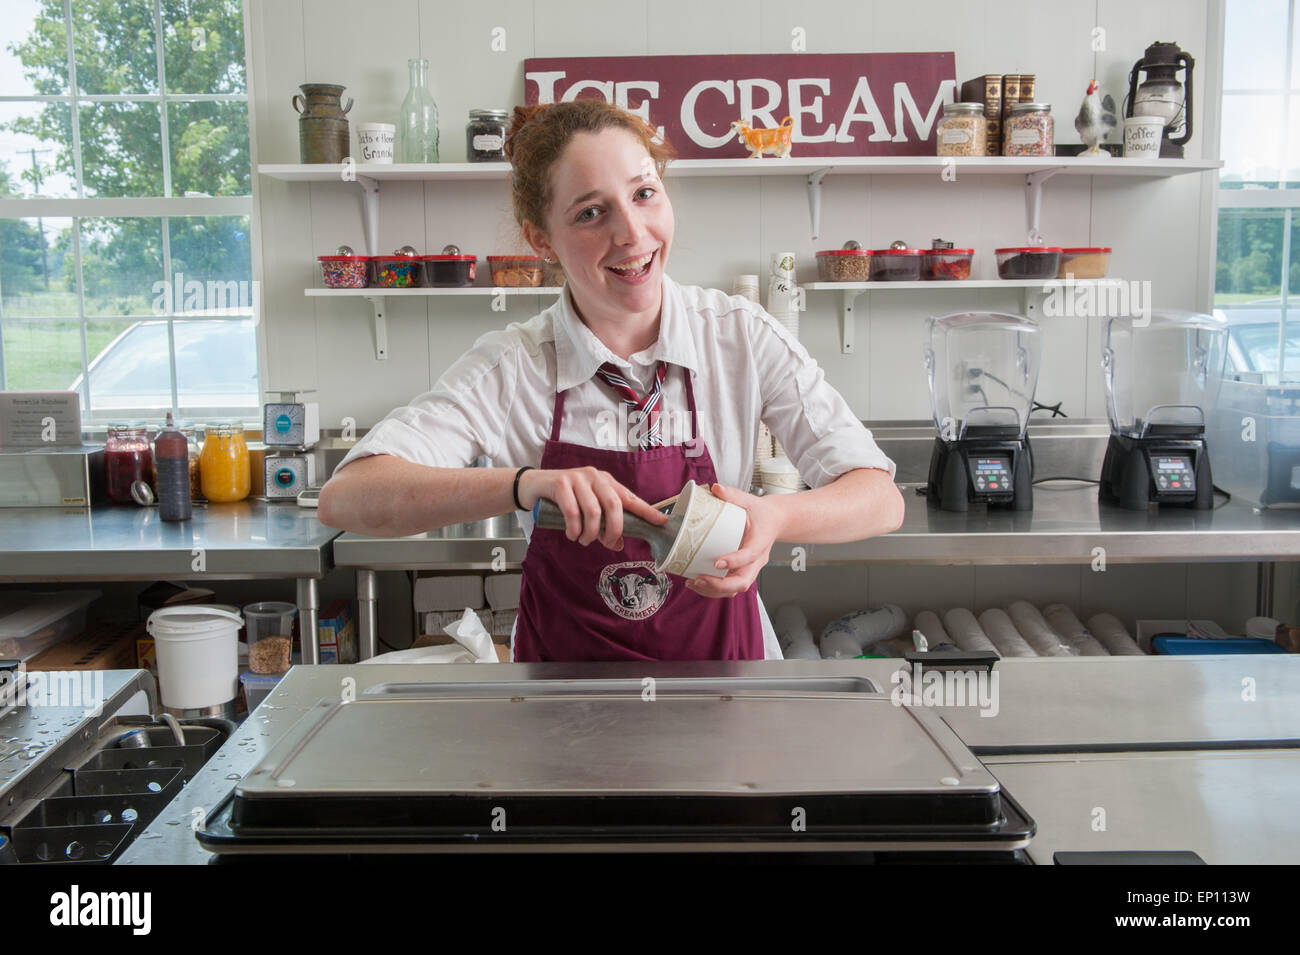 Young woman serving ice cream in Baltimore, Maryland, USA Stock Photo